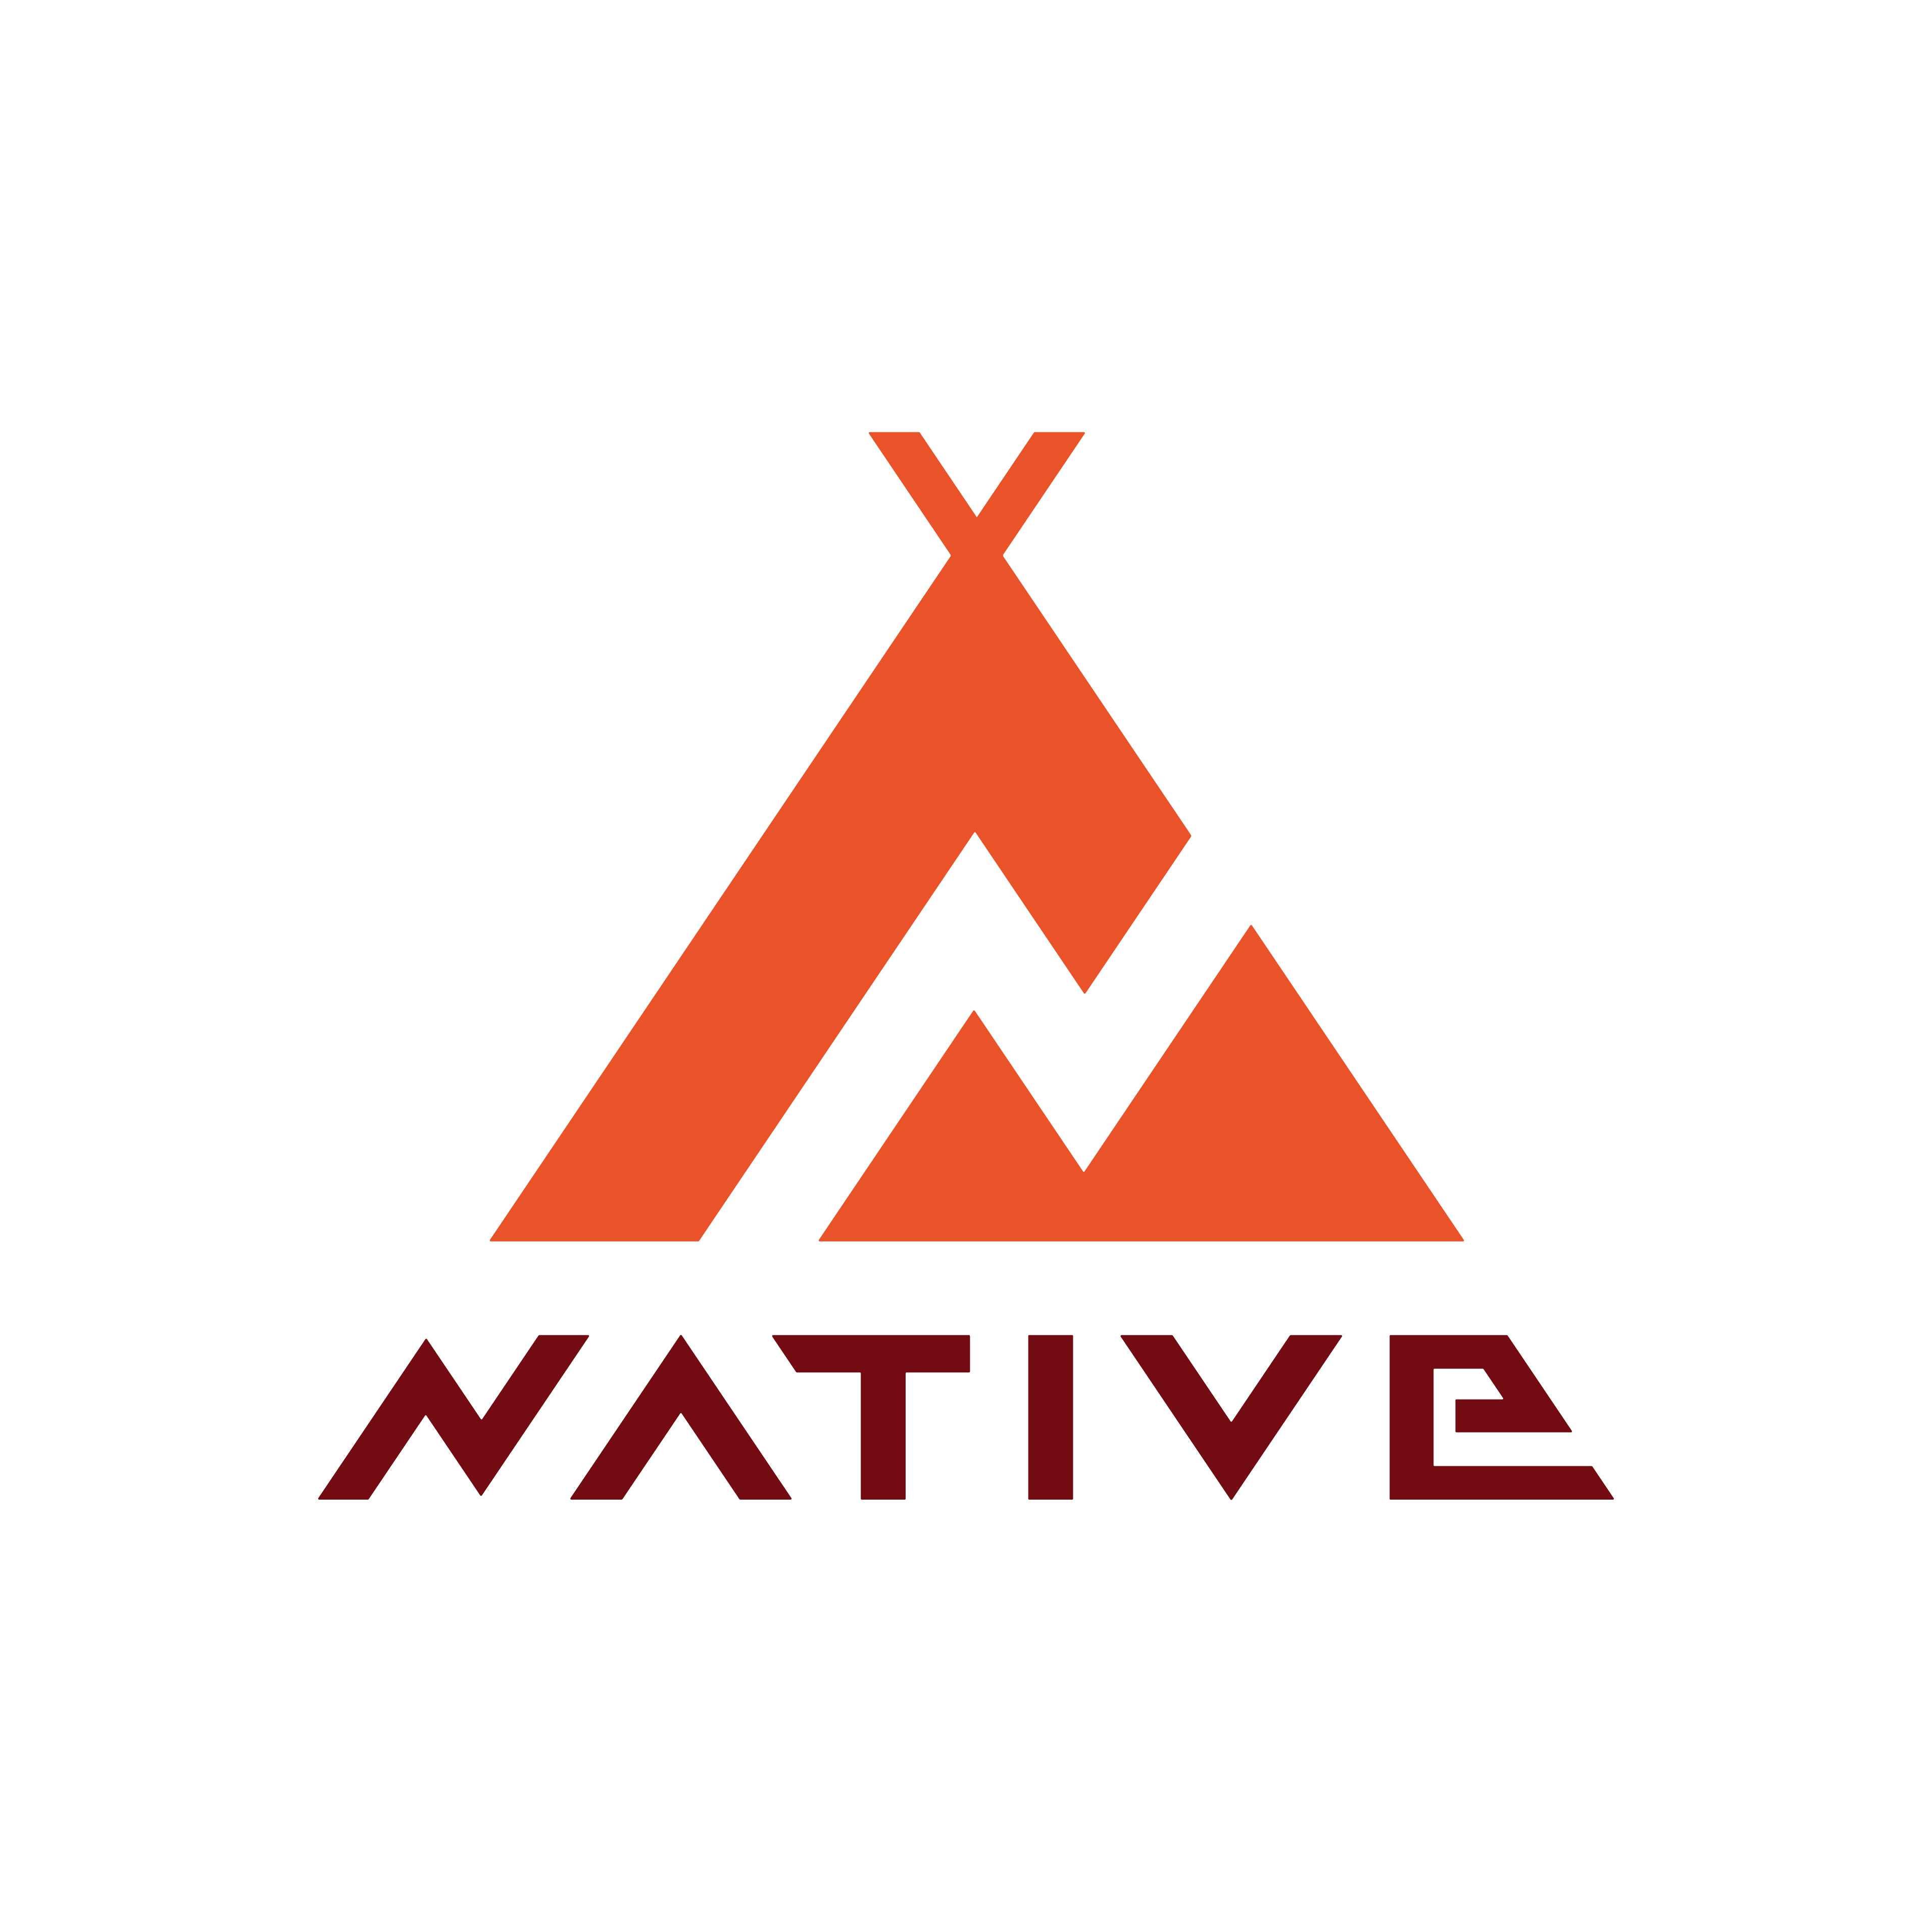 Native logo design by logo designer Menges Design for your inspiration and for the worlds largest logo competition